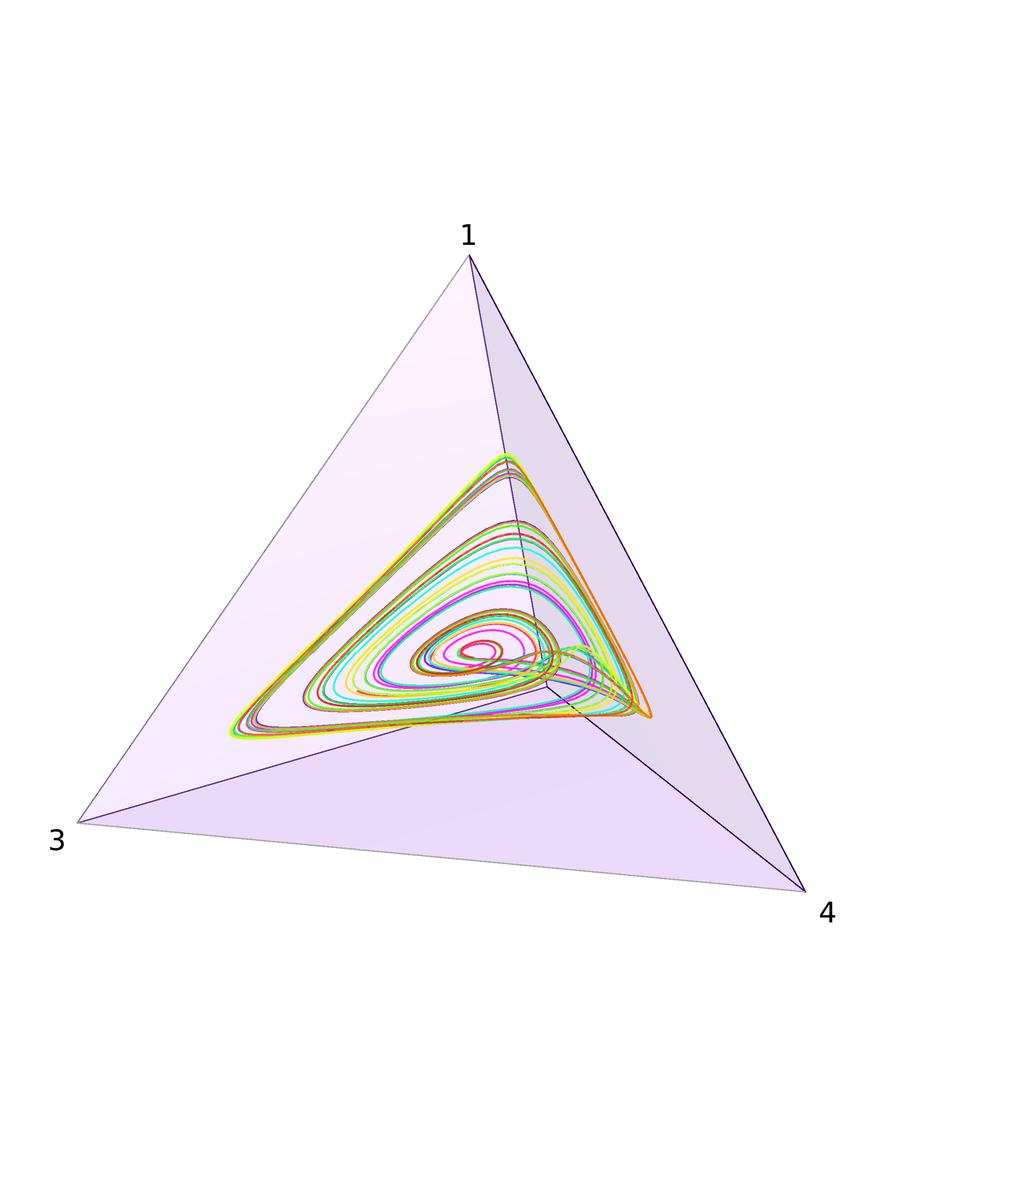 Figure 3: Dynamo 4S output: a chaotic attractor under the replicator dynamic. Evidently, this solution trajectory converges to a chaotic attractor.